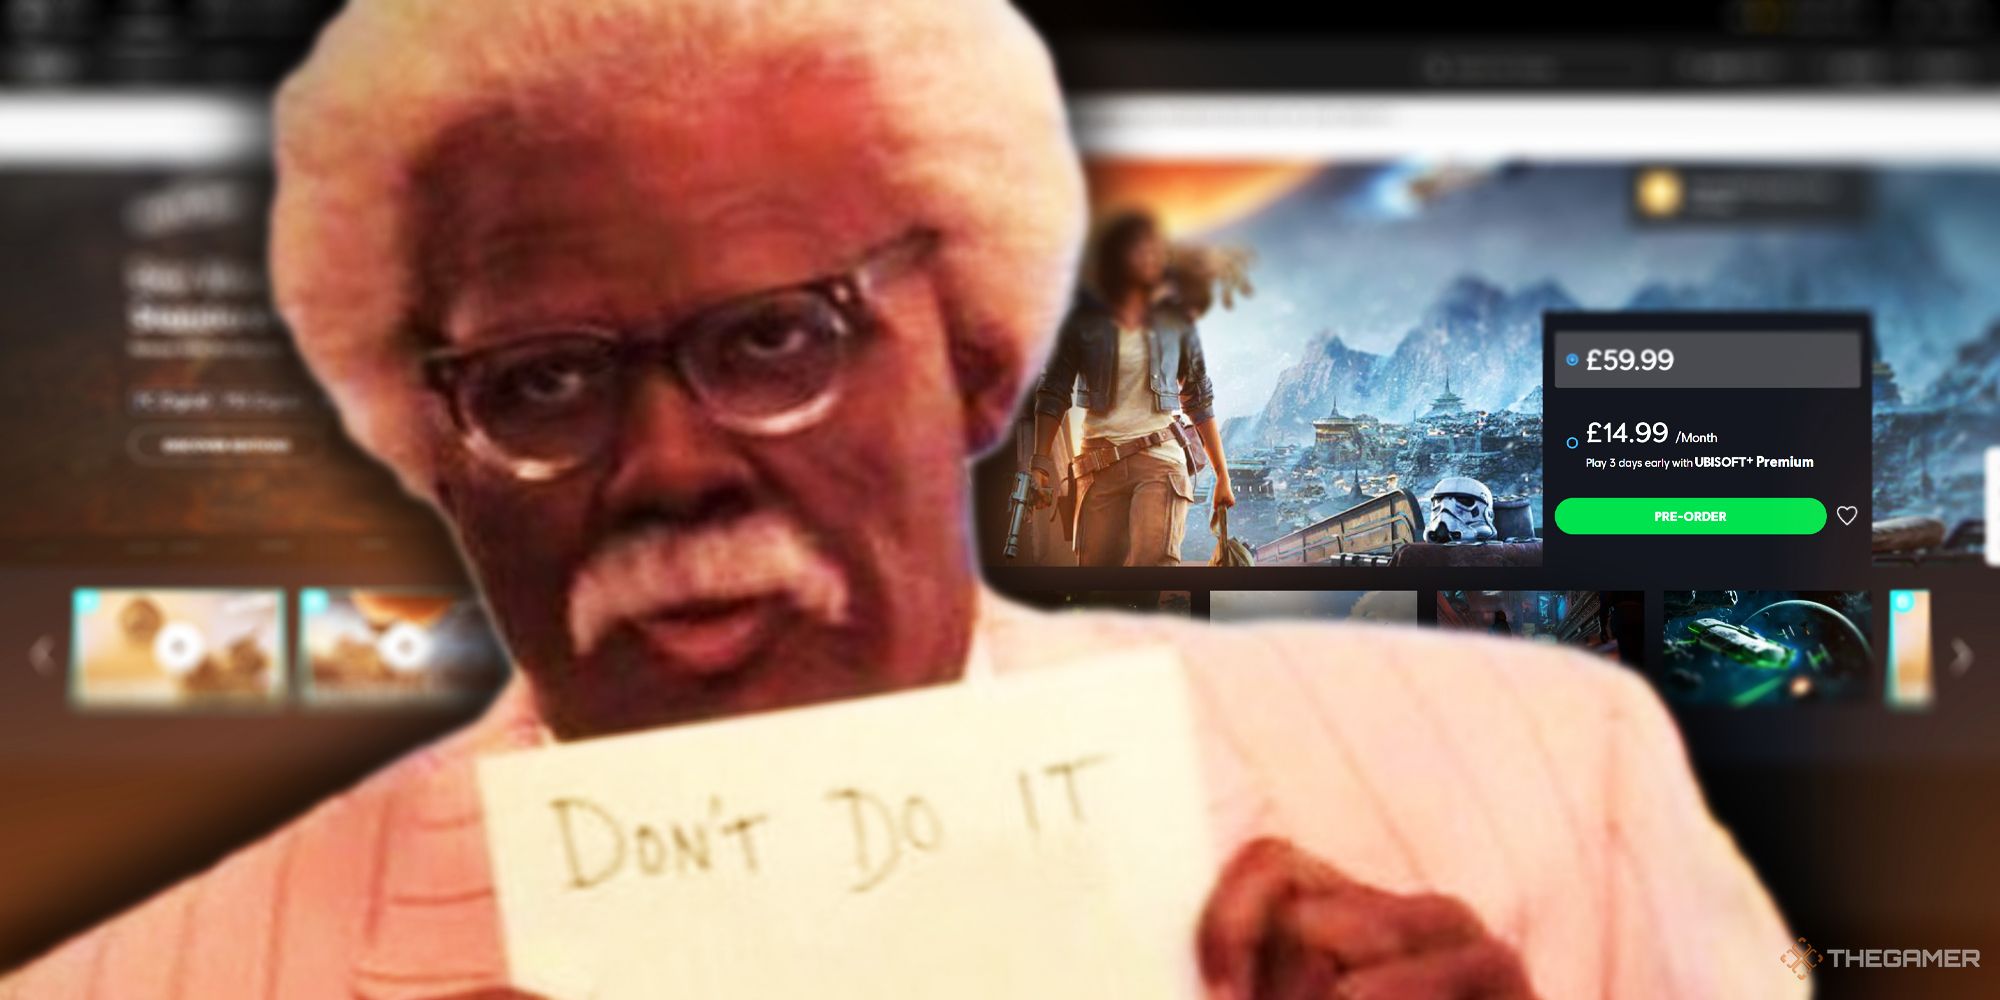 The pre-order site for Star Wars Outlaws in the background, with a man holding up a piece of paper with 